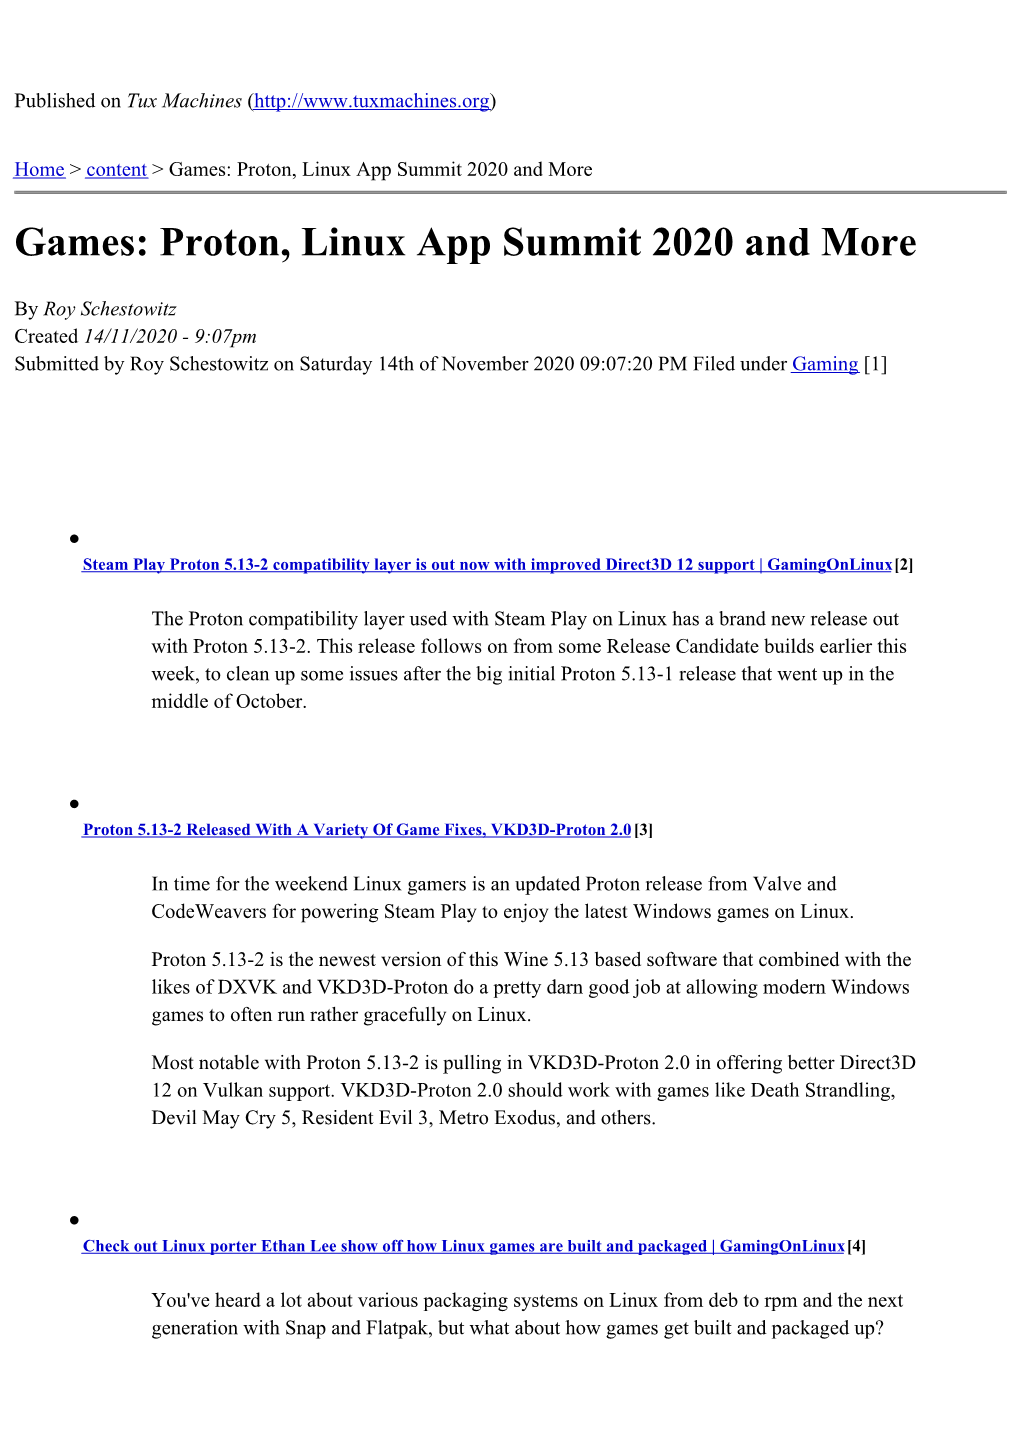 Proton, Linux App Summit 2020 and More